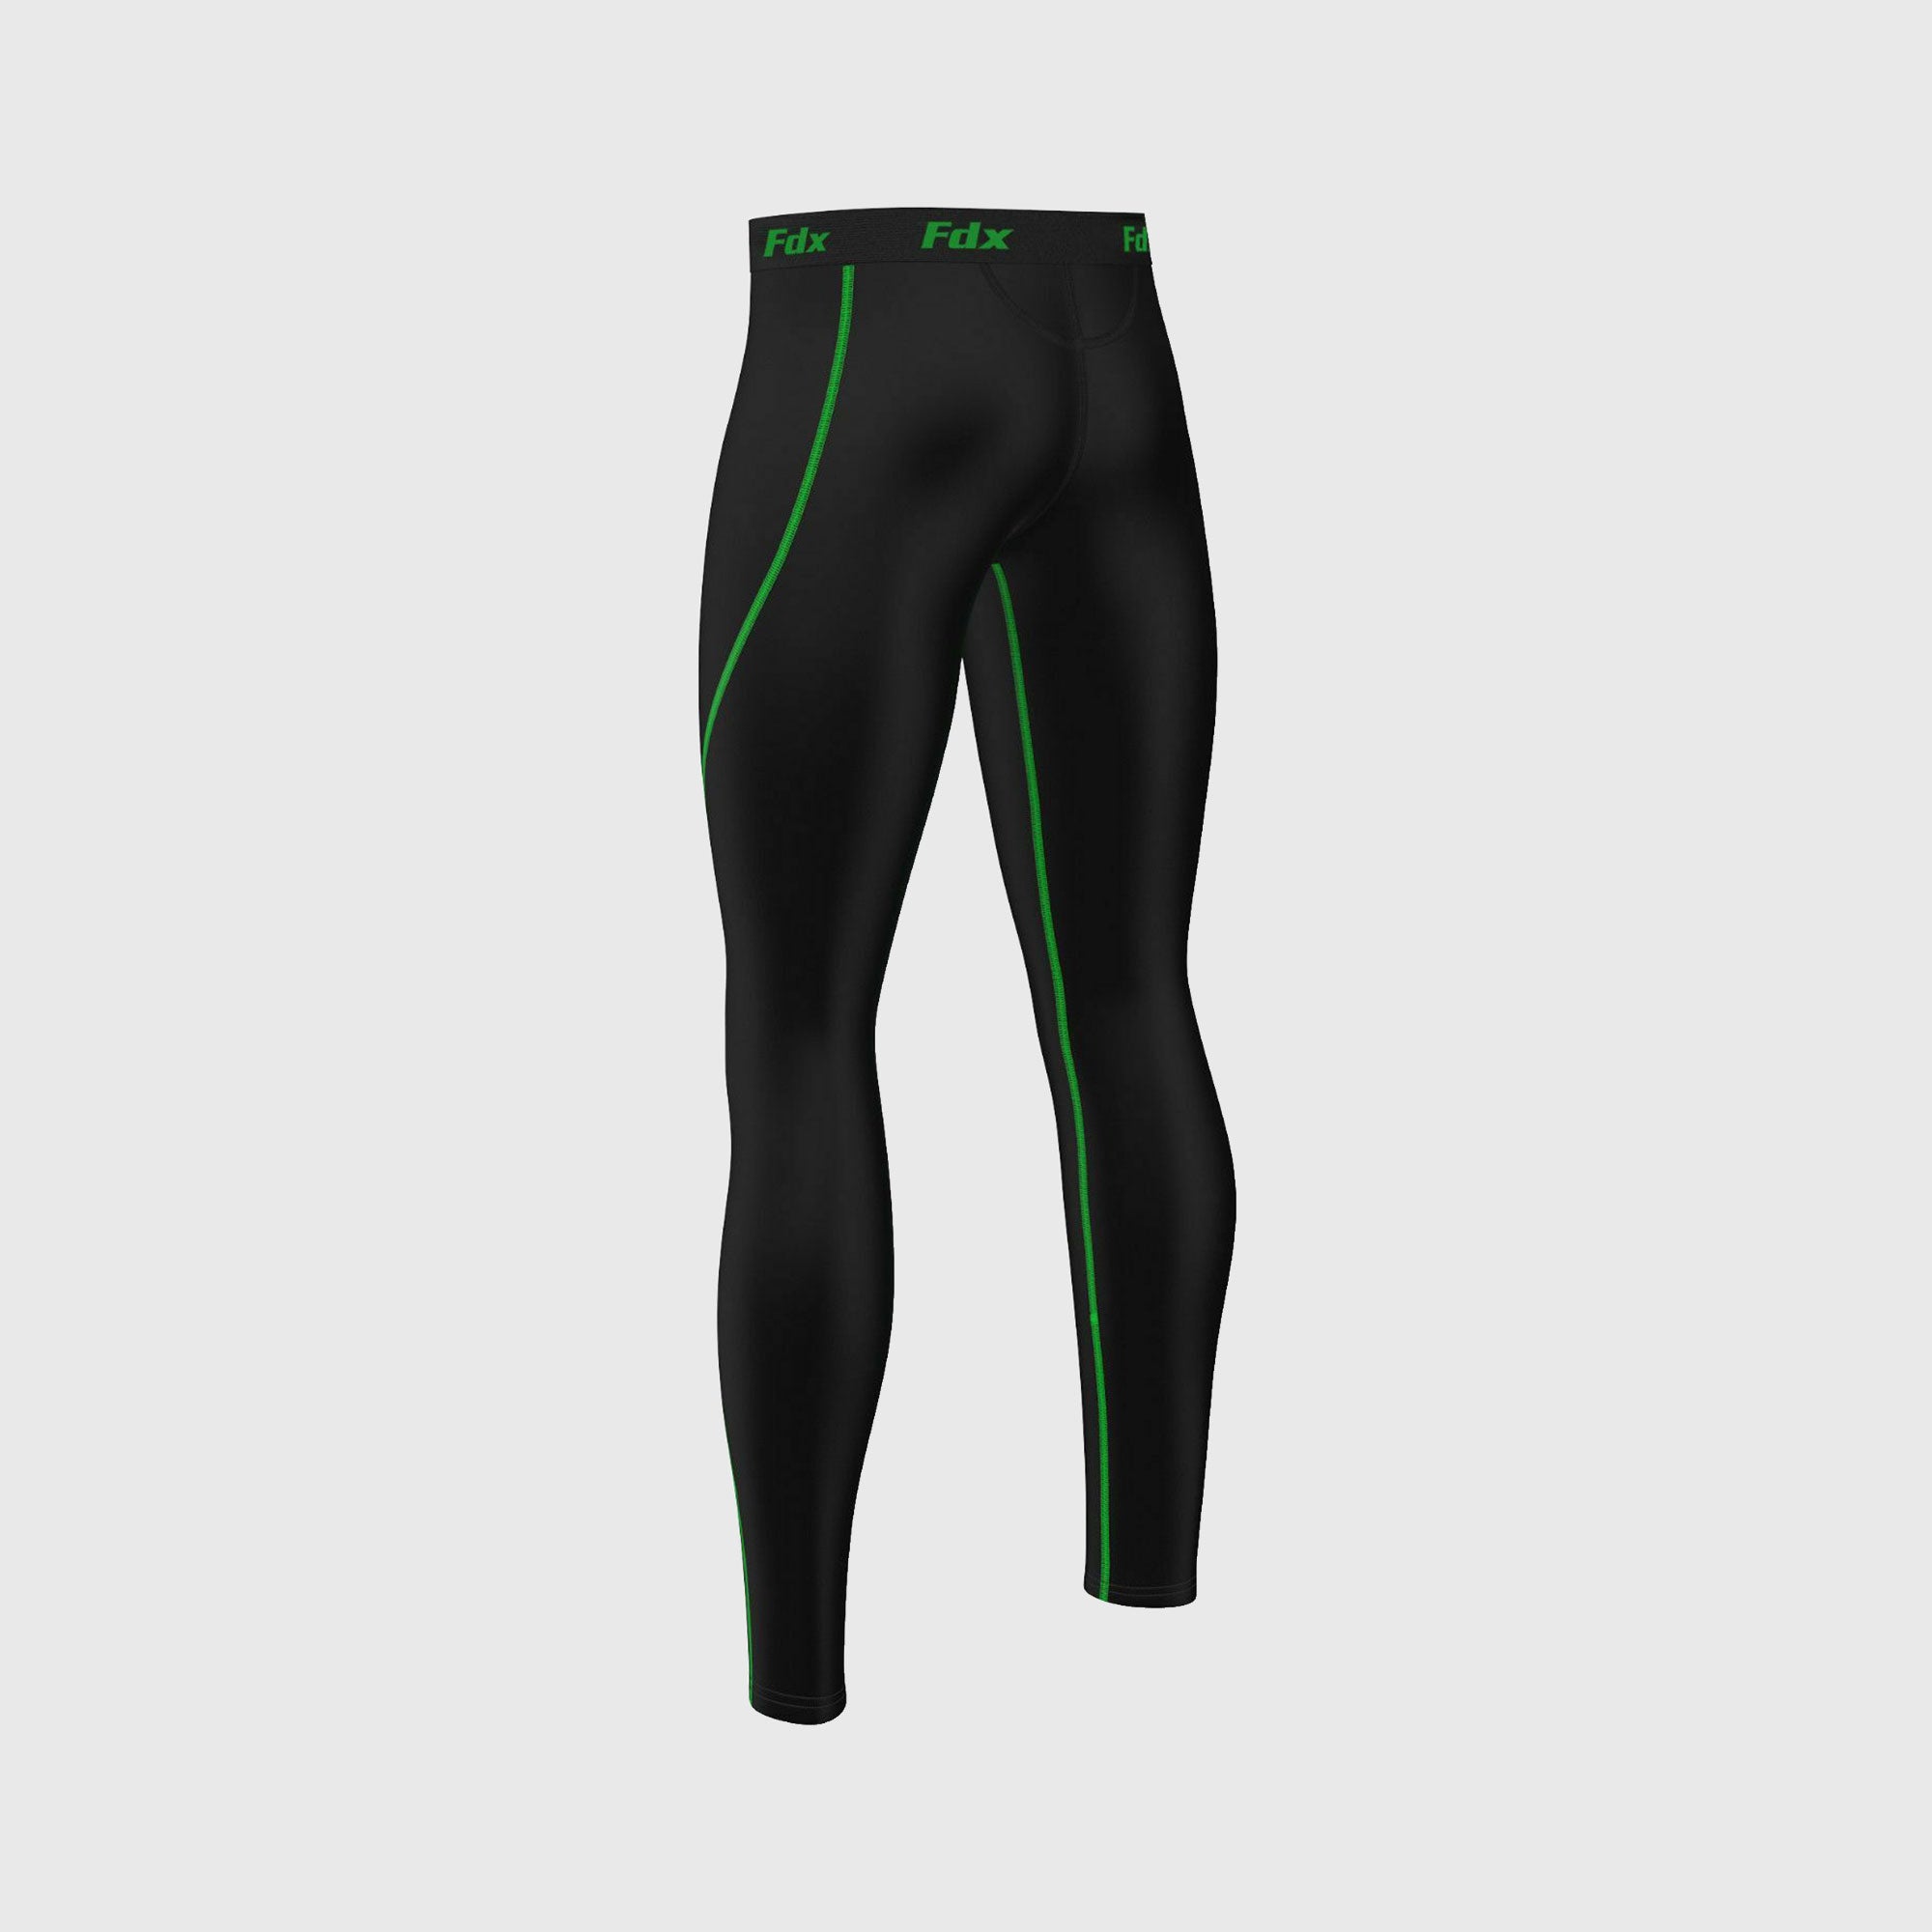 Fdx Black & Green Compression Tights Leggings Gym Workout Running Athletic Yoga Elastic Waistband Strechable Breathable Training Jogging Pants - T5